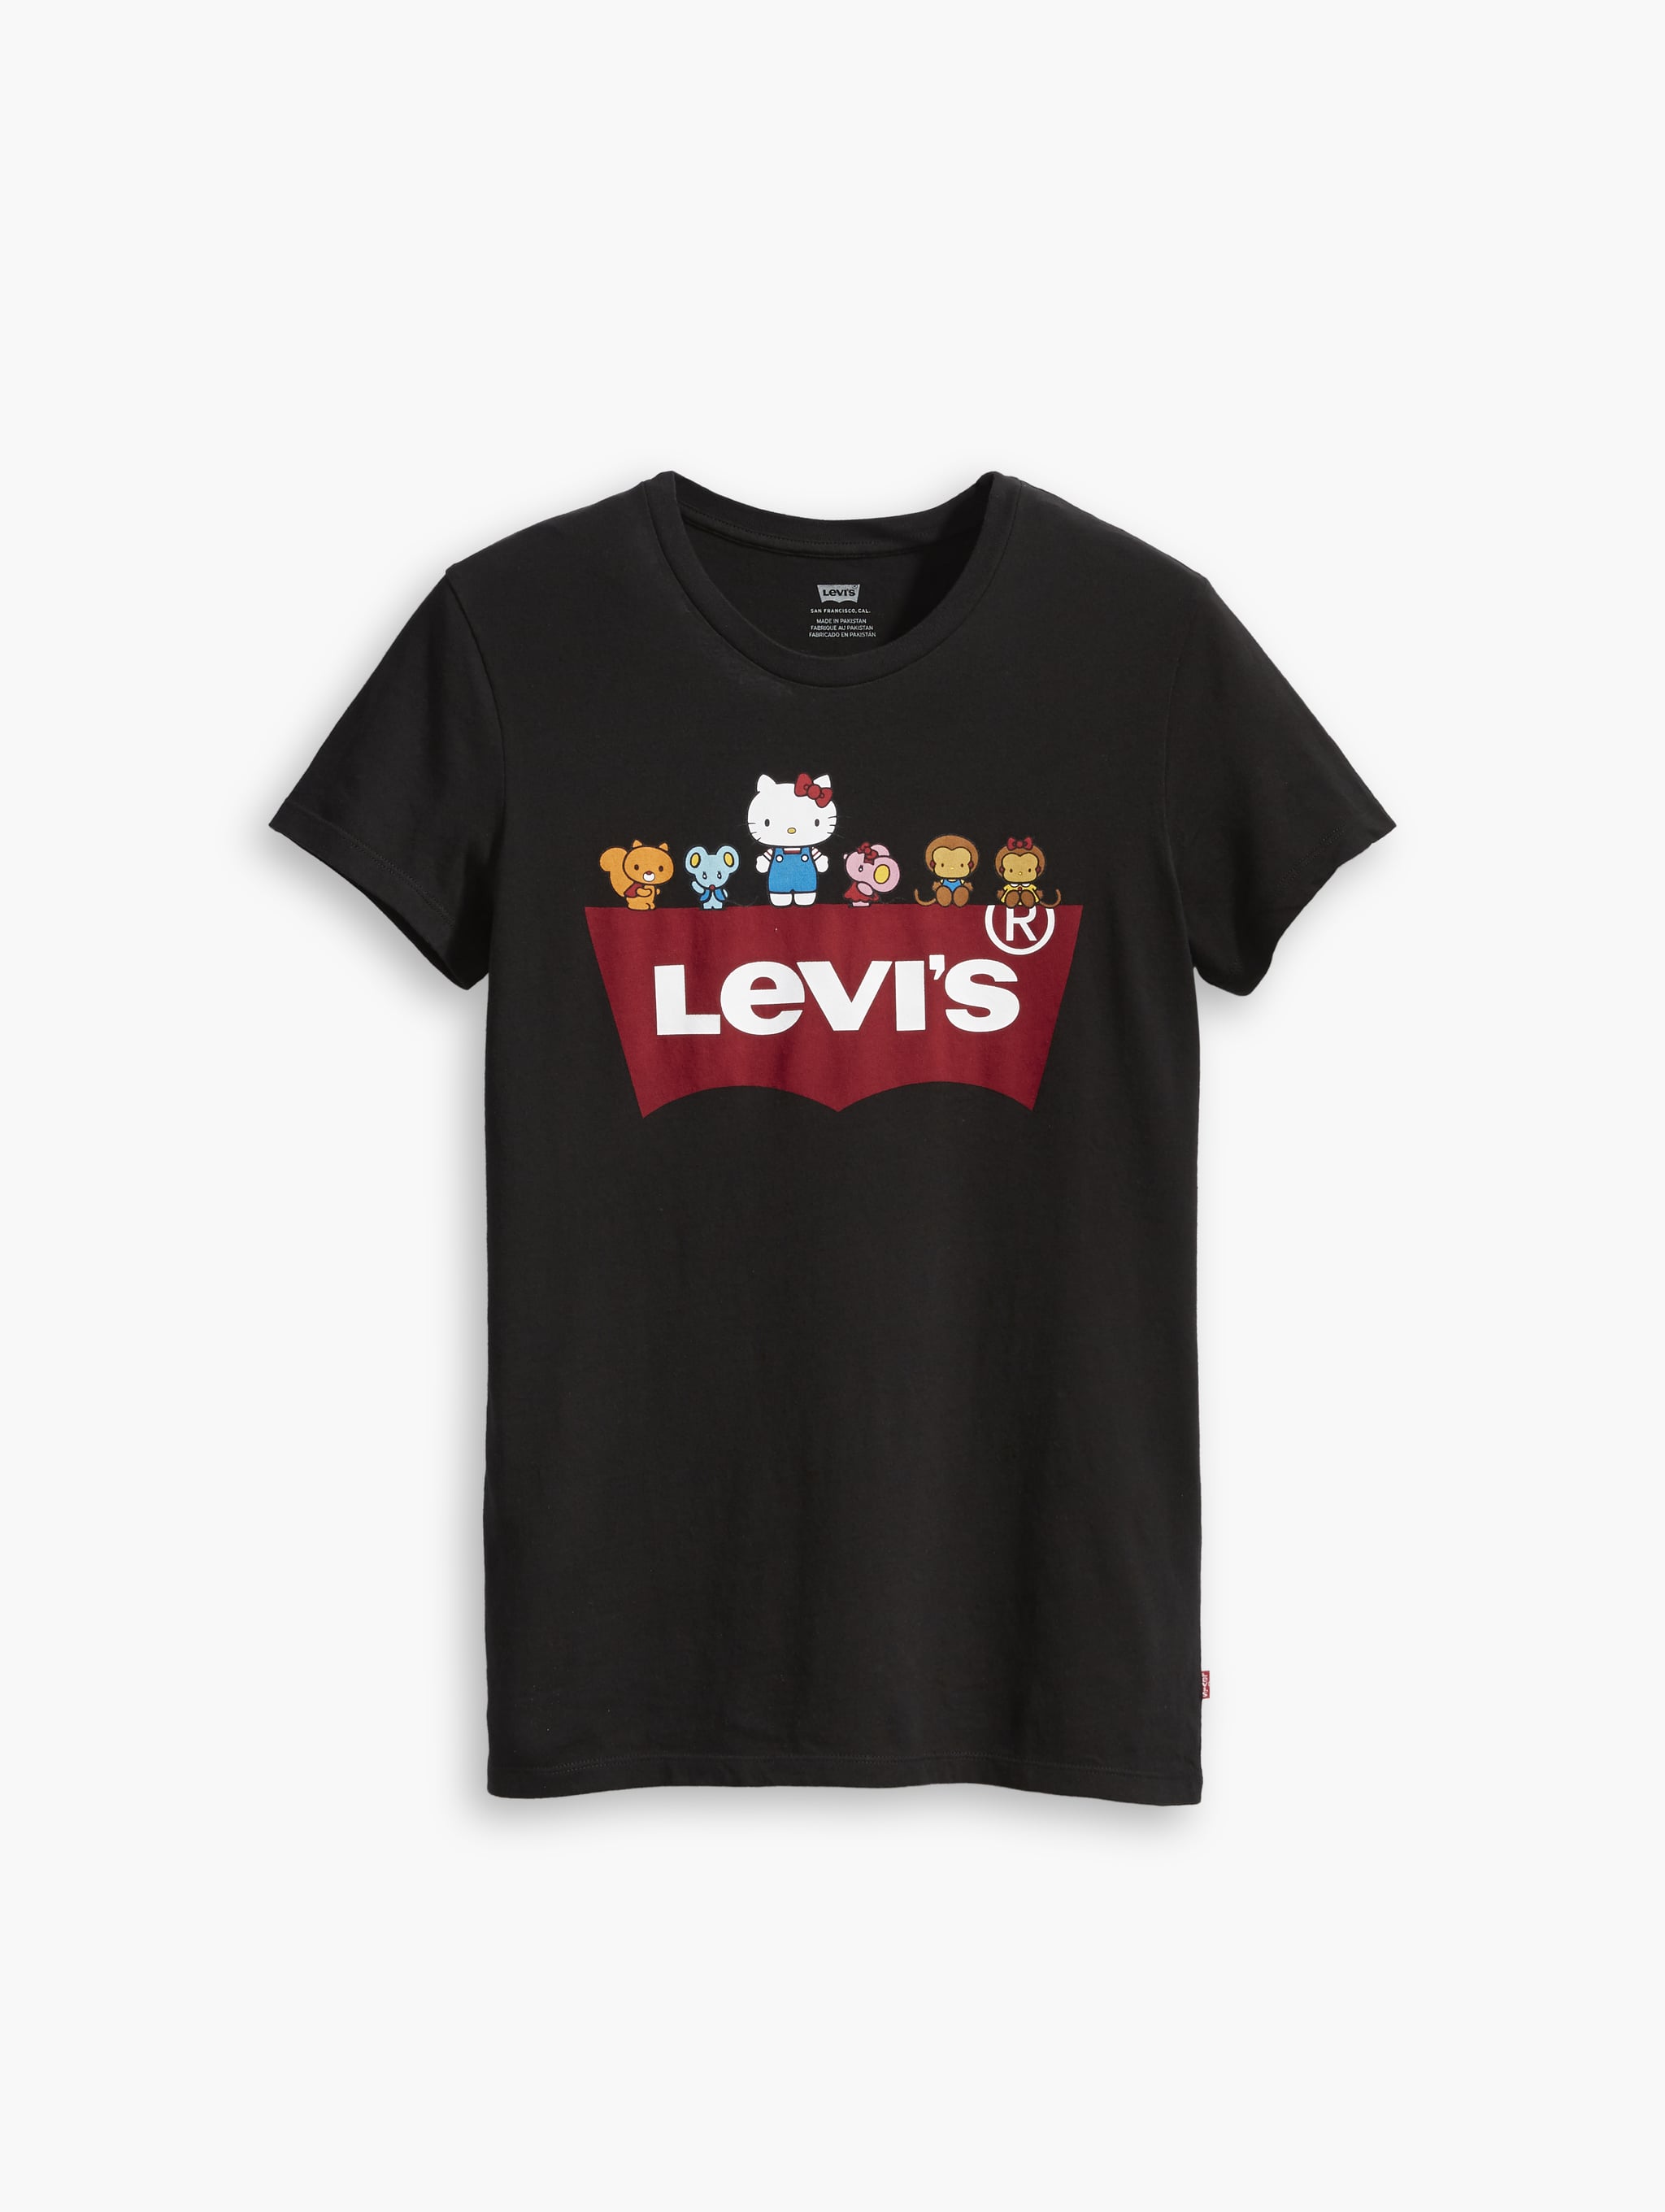 about you levis t shirt